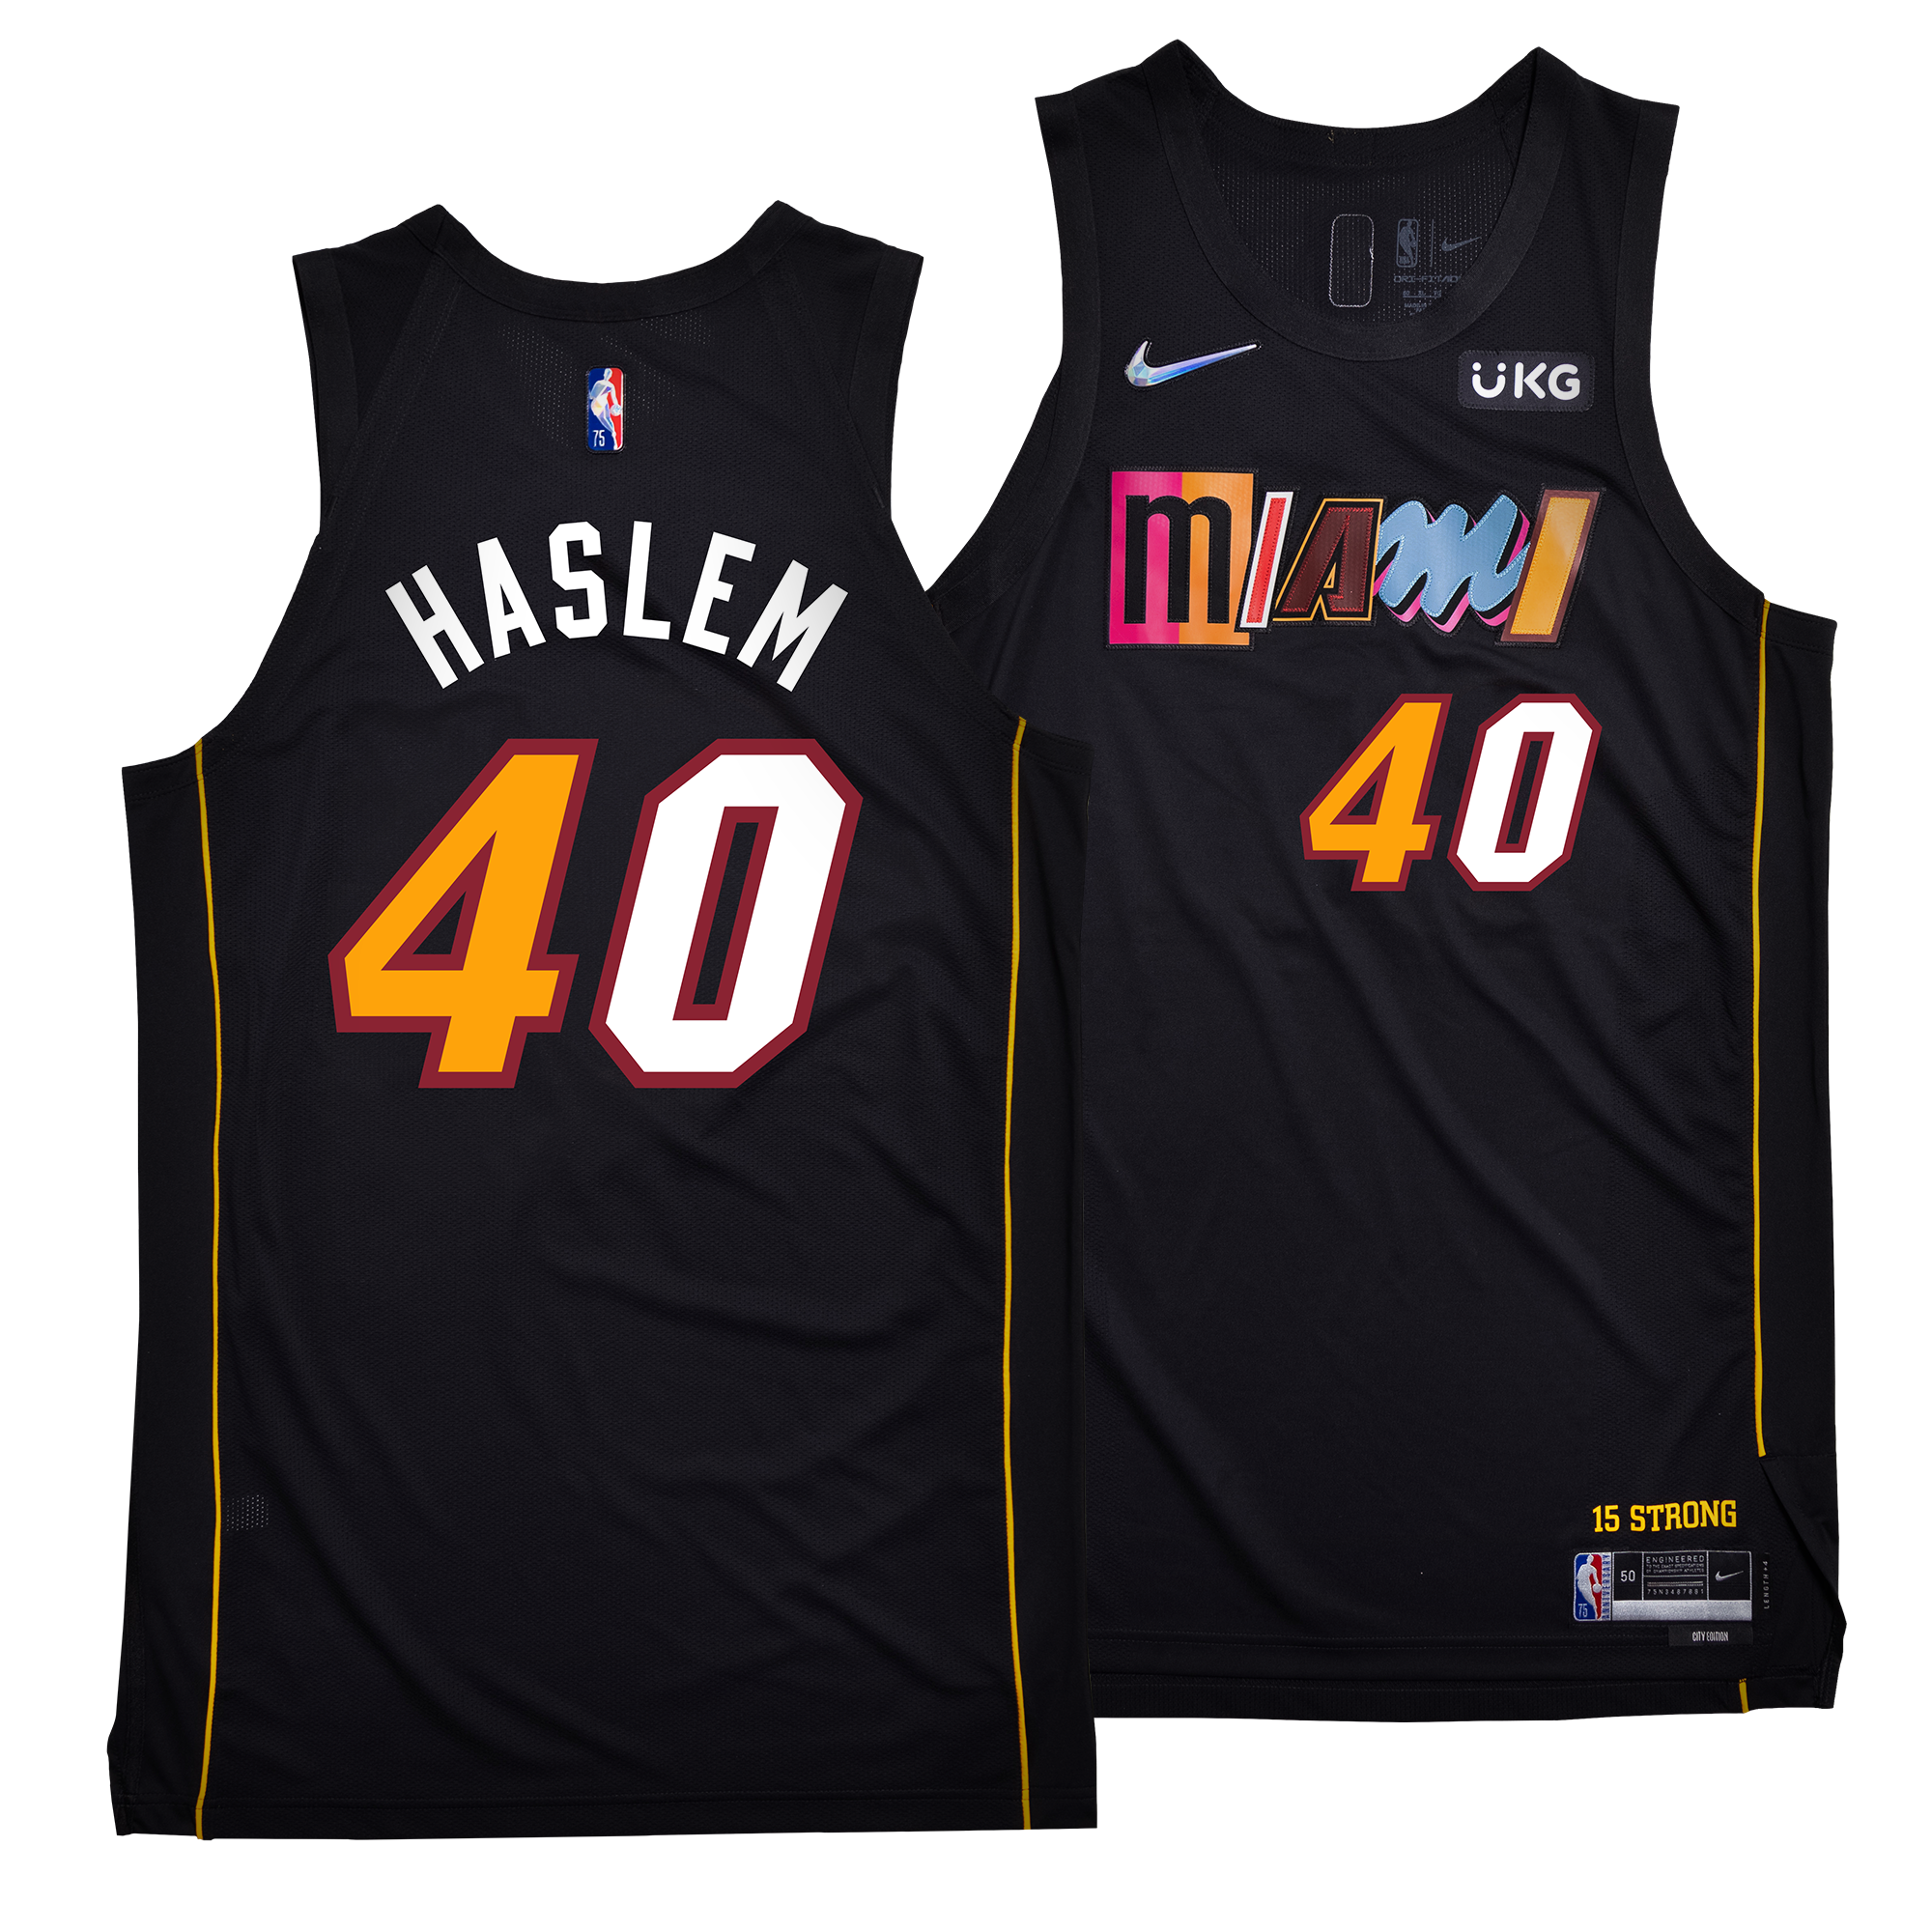 Udonis Haslem - Miami Heat - 2018-19 Season - Game-Worn Pink Earned Edition  Jersey - Dressed, Did Not Play